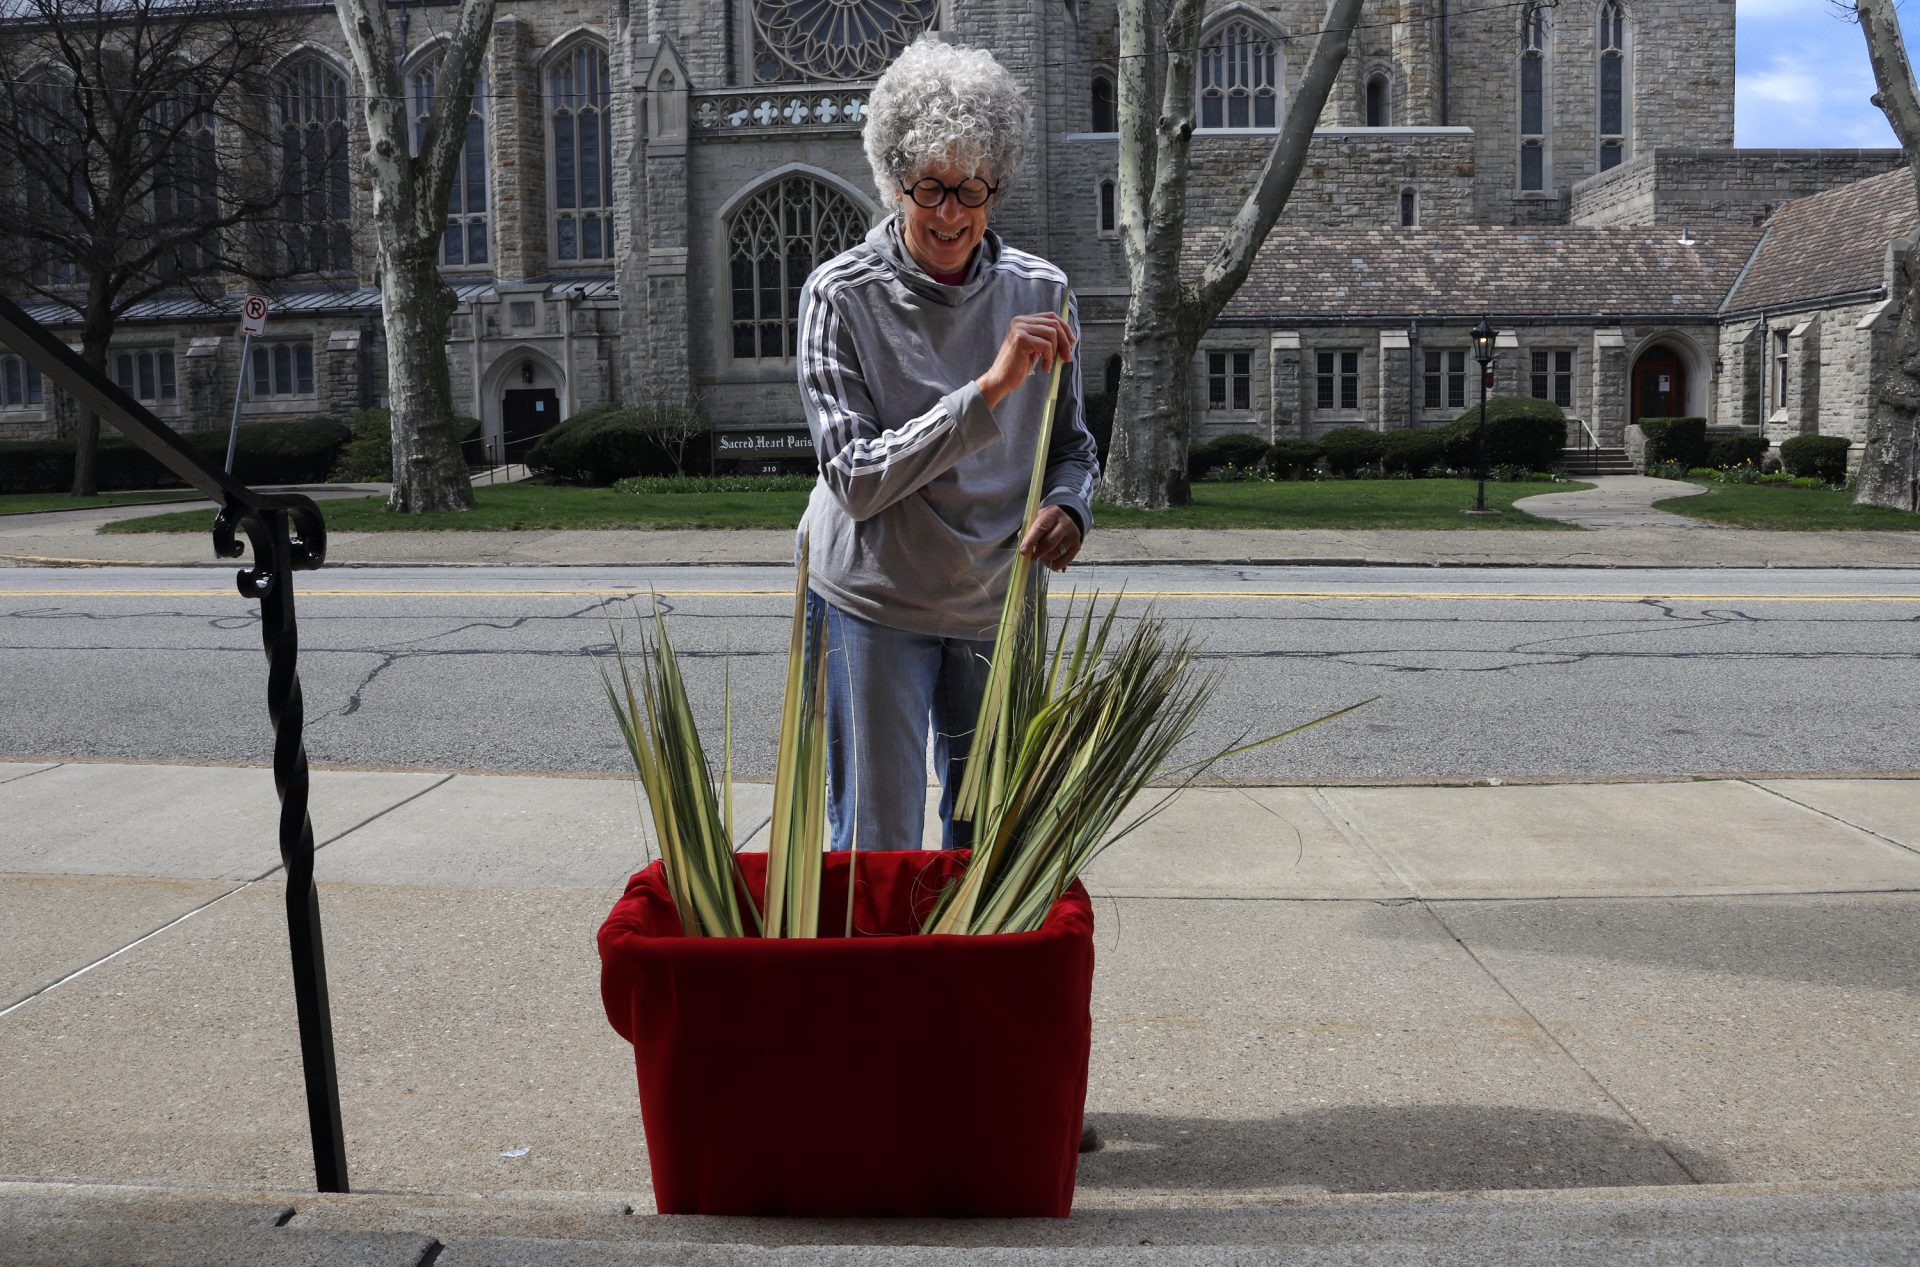 Joanna Schultz, a member of the choir at Calvary Episcopal Church, picks up her palms from a container on the steps outside the church on Palm Sunday, April 5, 2020 in Pittsburgh. As part of the statewide effort to mitigate the spread of COVID-19, the church is closed, and offering online streaming of services.